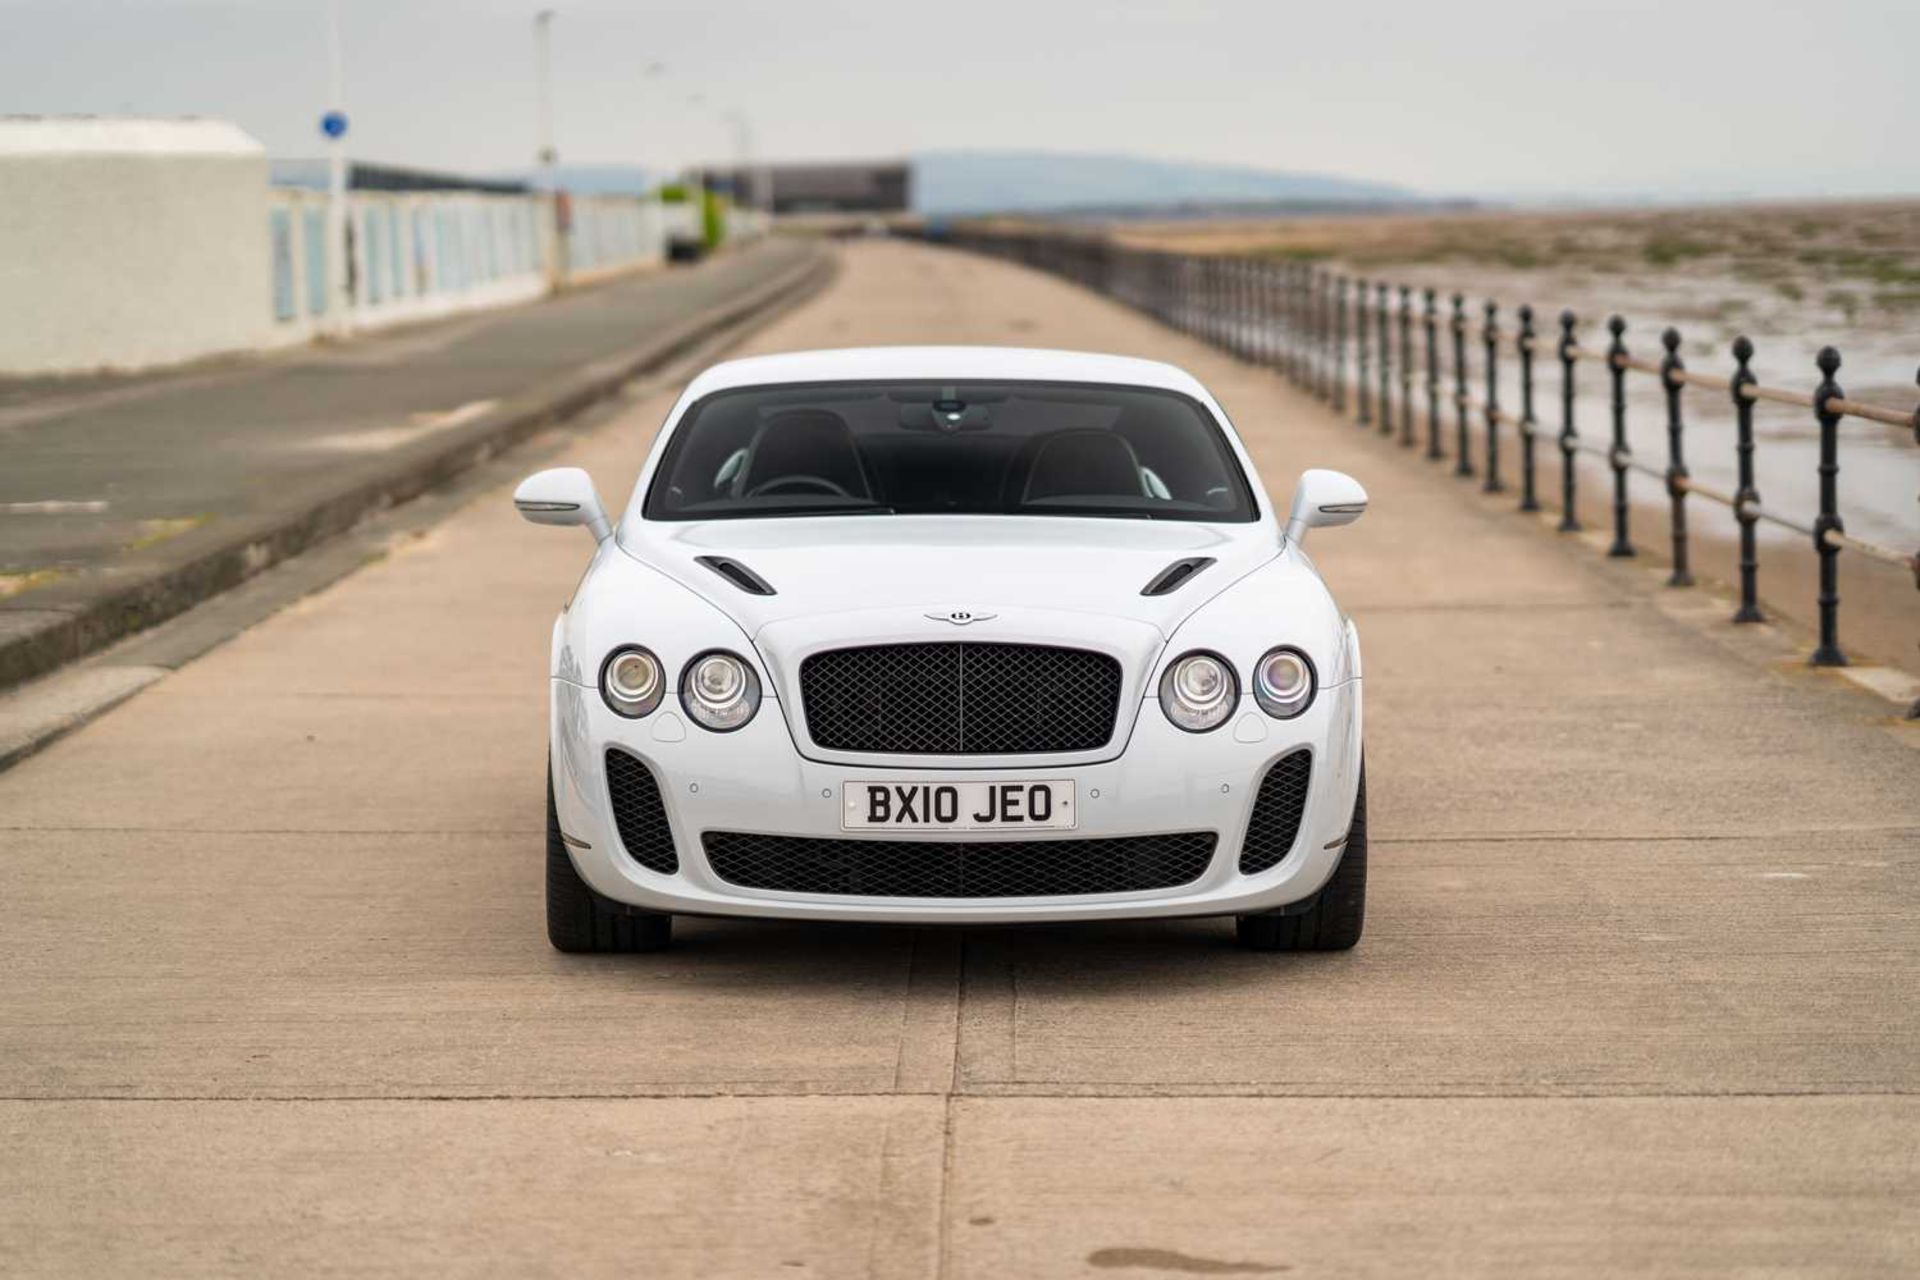 2010 Bentley Continental Supersports Only 33,000 miles with full Bentley service history - Image 3 of 52